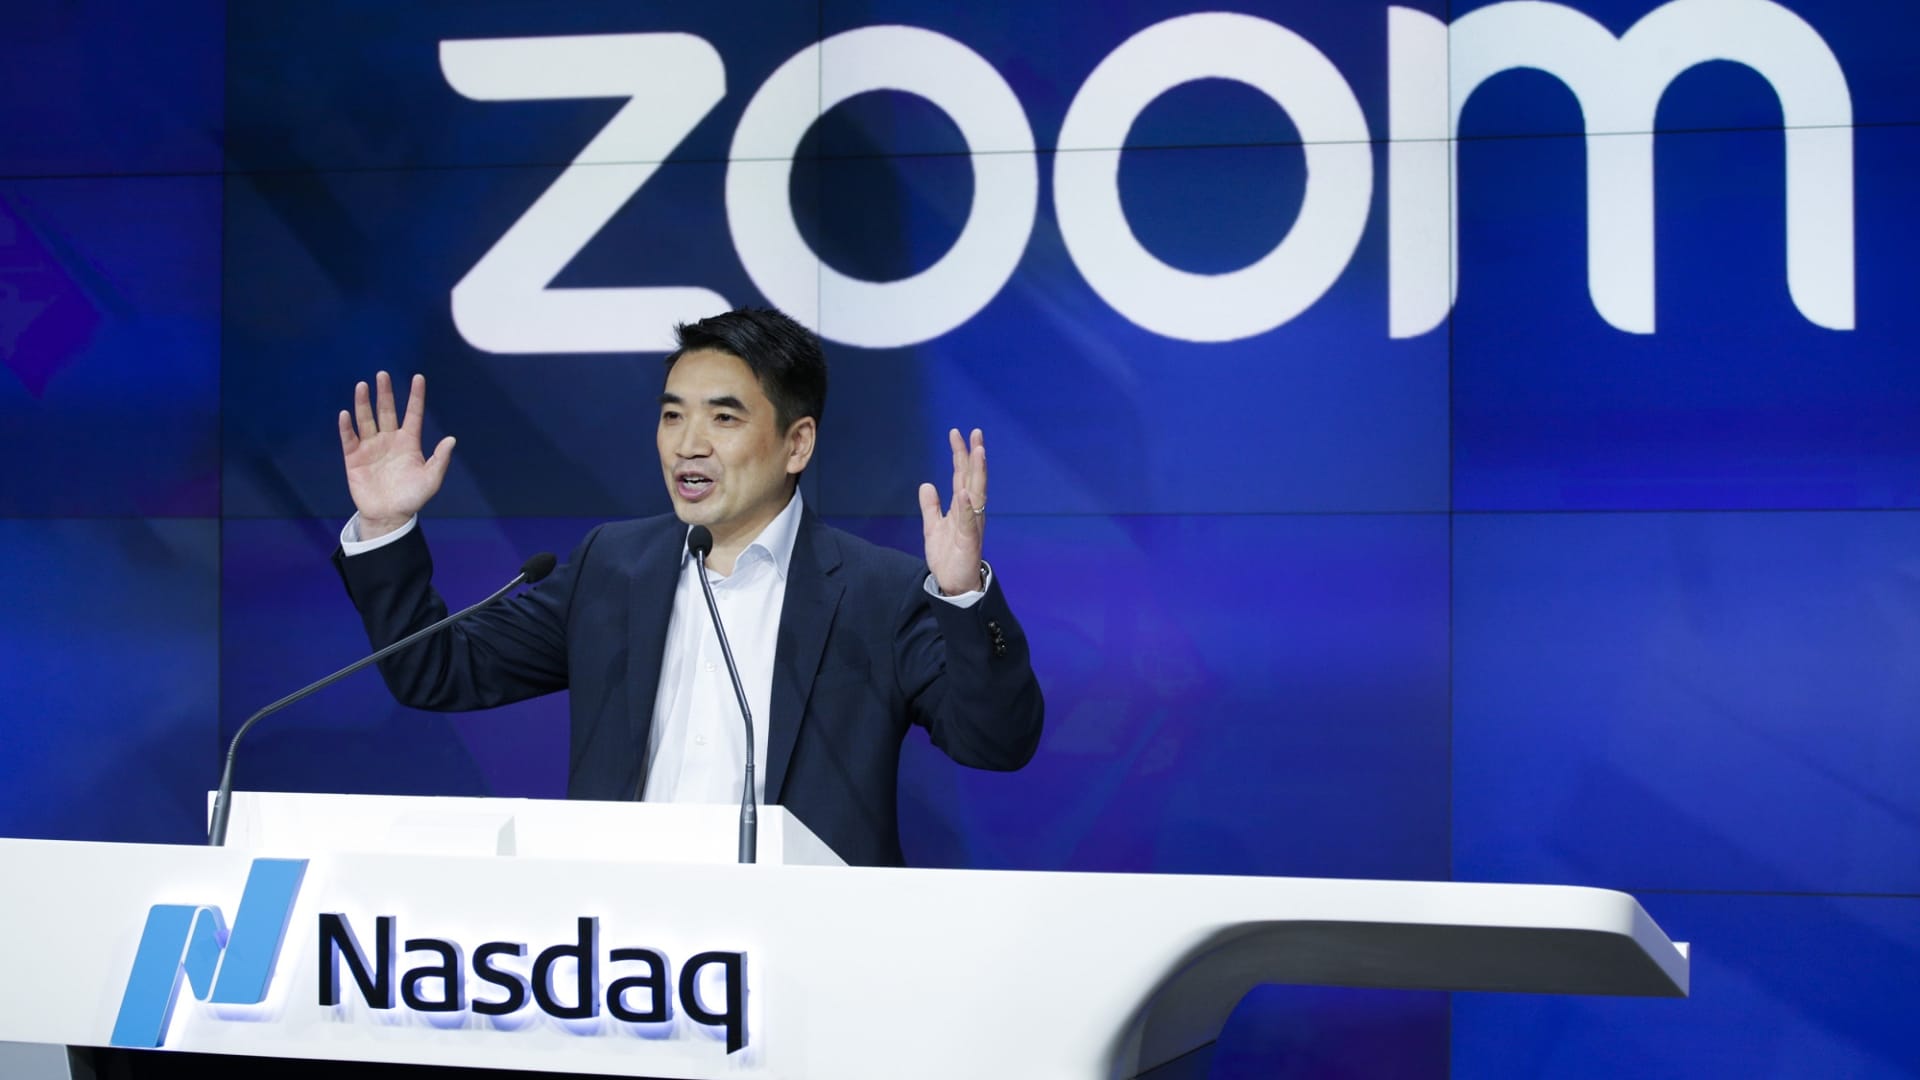 Zoom jumps 16% on the earnings rate in the first quarter and strong guidance